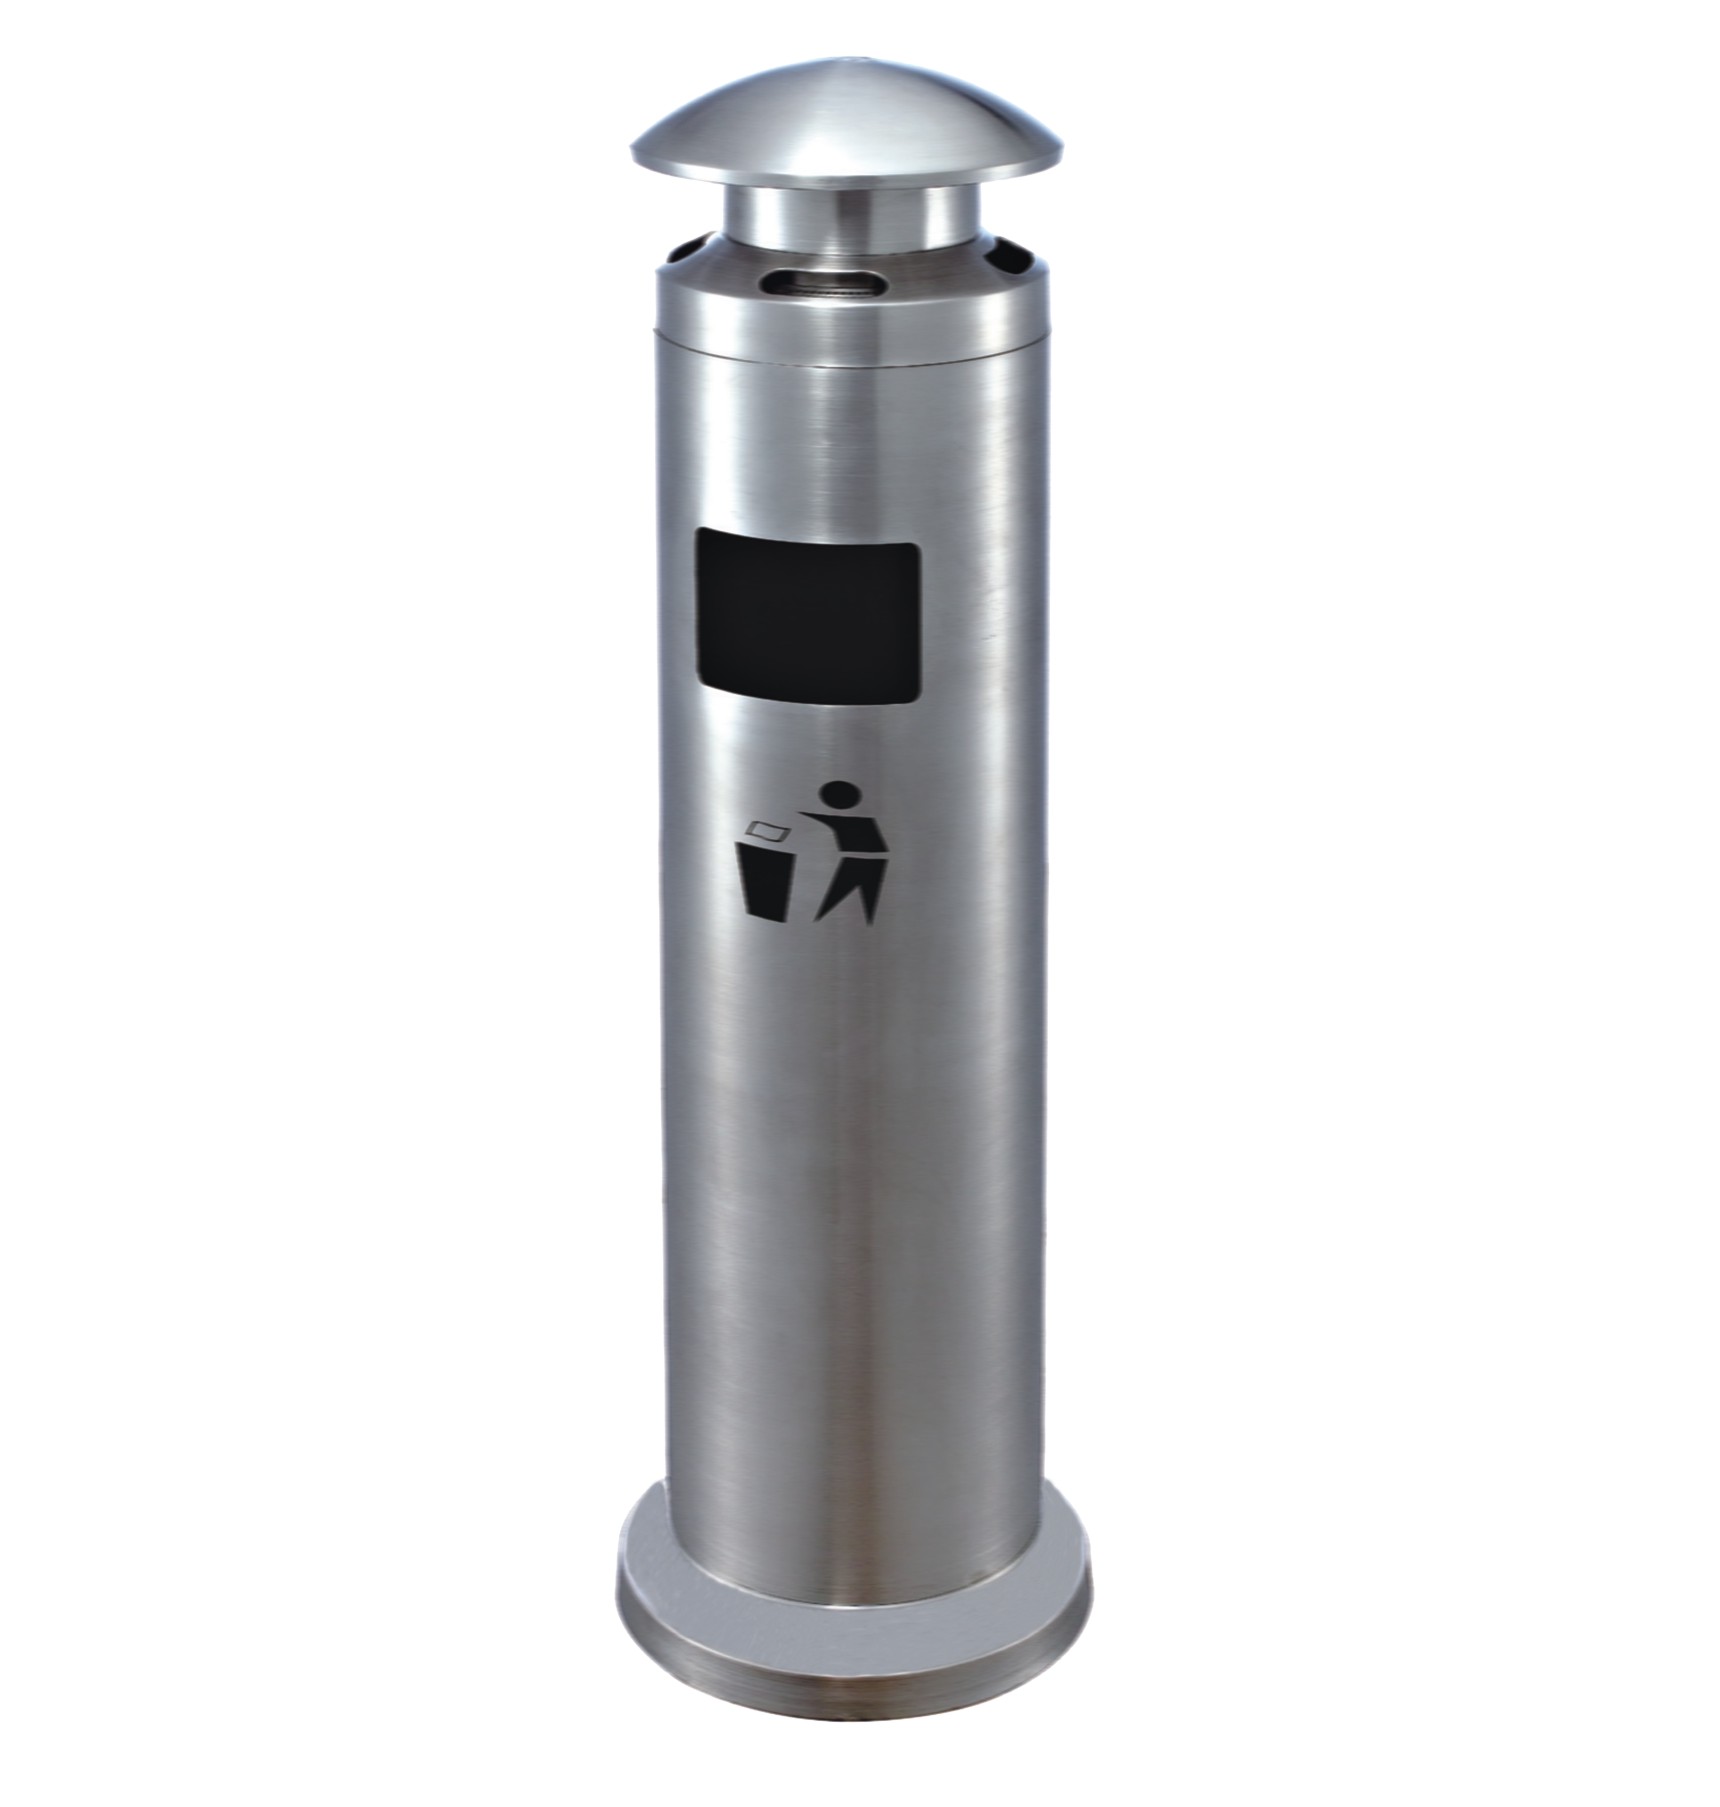  Industrial Stainless Steel Ashtray For Outdoor Use (YH-247A)